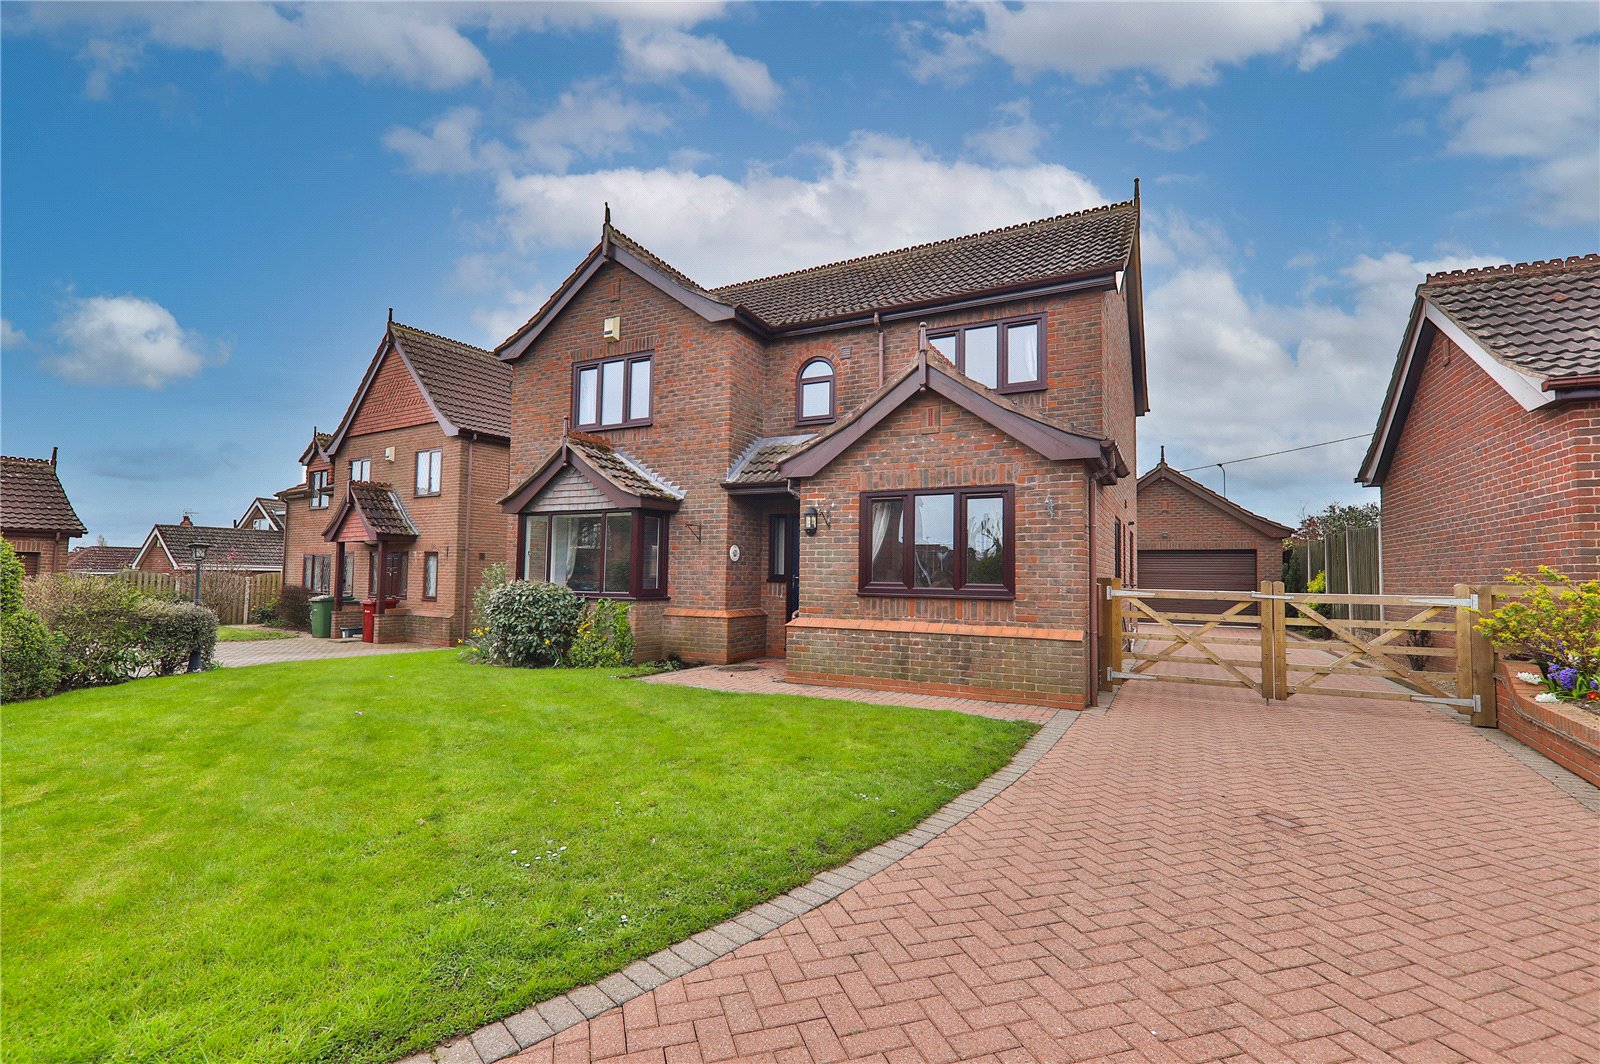 4 bed house for sale in Schofield Close, Barrow-upon-Humber, DN19